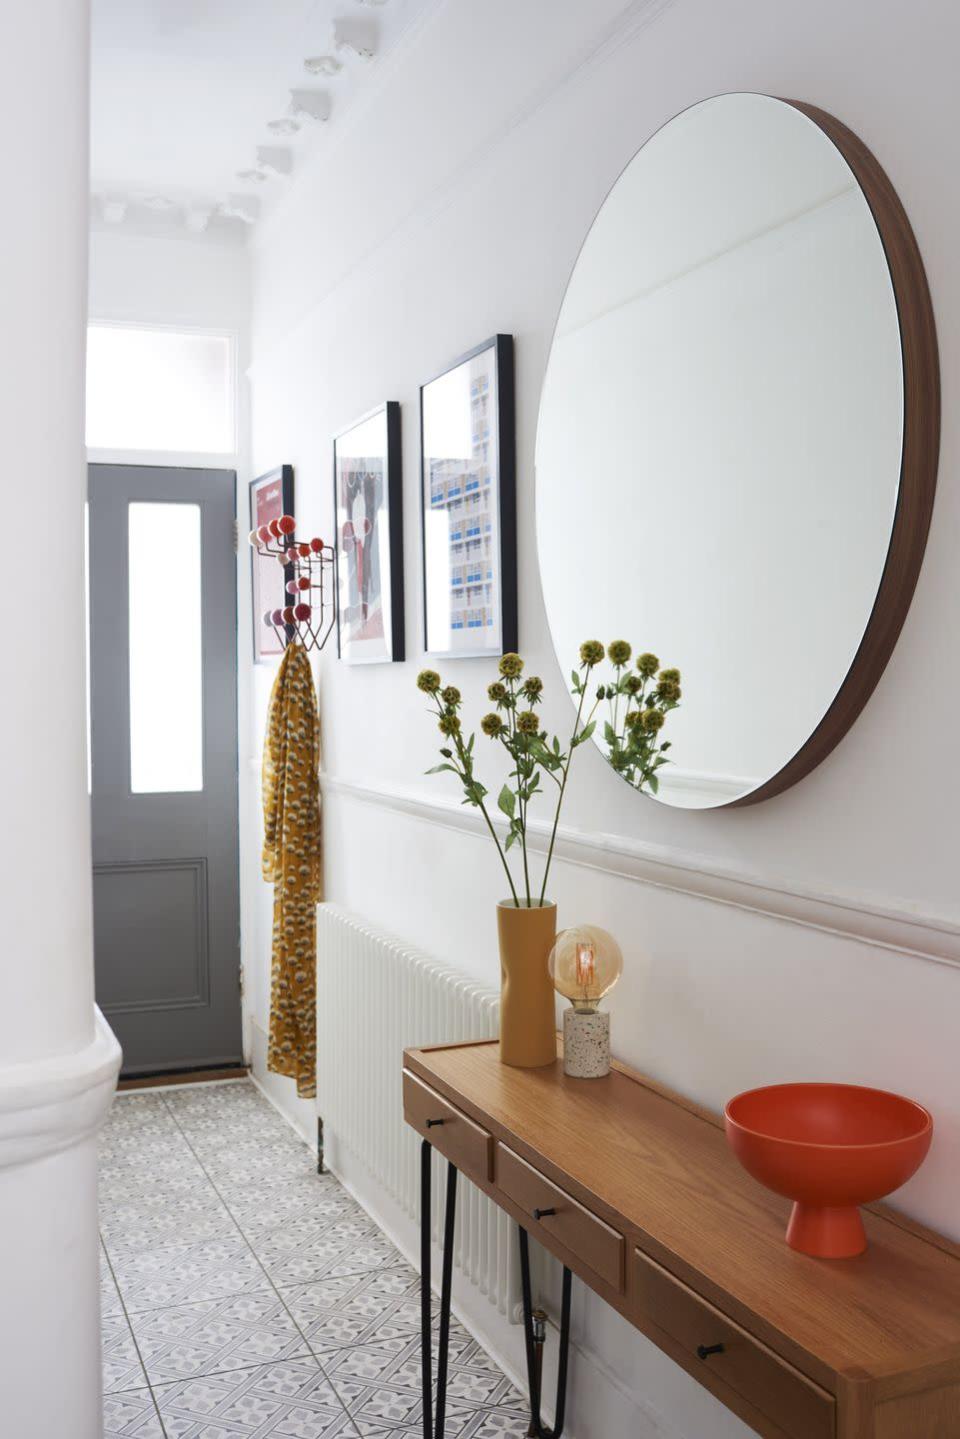 <p>'Create the illusion of space by adding <a href="https://www.housebeautiful.com/uk/decorate/hallway/g27718078/hallway-mirrors/" rel="nofollow noopener" target="_blank" data-ylk="slk:mirrors" class="link ">mirrors</a>,' says Emily. 'They reflect light, making the space seem wider and brighter, as well as giving you the chance to double check your appearance before you walk out the door.' </p><p>Pictured: <a href="https://www.heals.com/orta-round-mirror.html" rel="nofollow noopener" target="_blank" data-ylk="slk:Orta Round Mirror at Heal’s" class="link ">Orta Round Mirror at Heal’s</a></p>